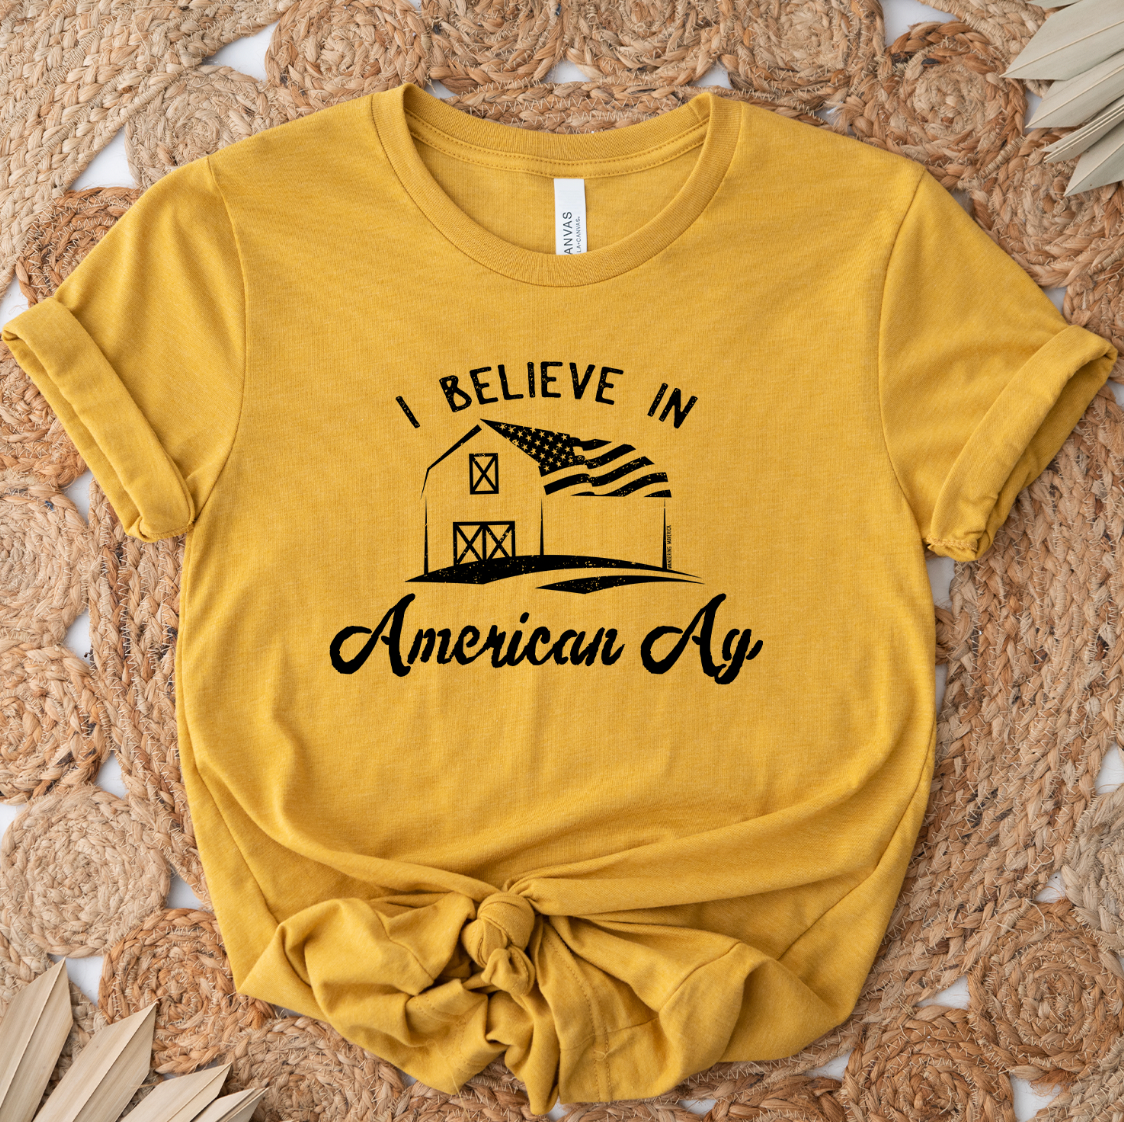 I Believe in the American Ag T-Shirt (XS-4XL) - Multiple Colors!